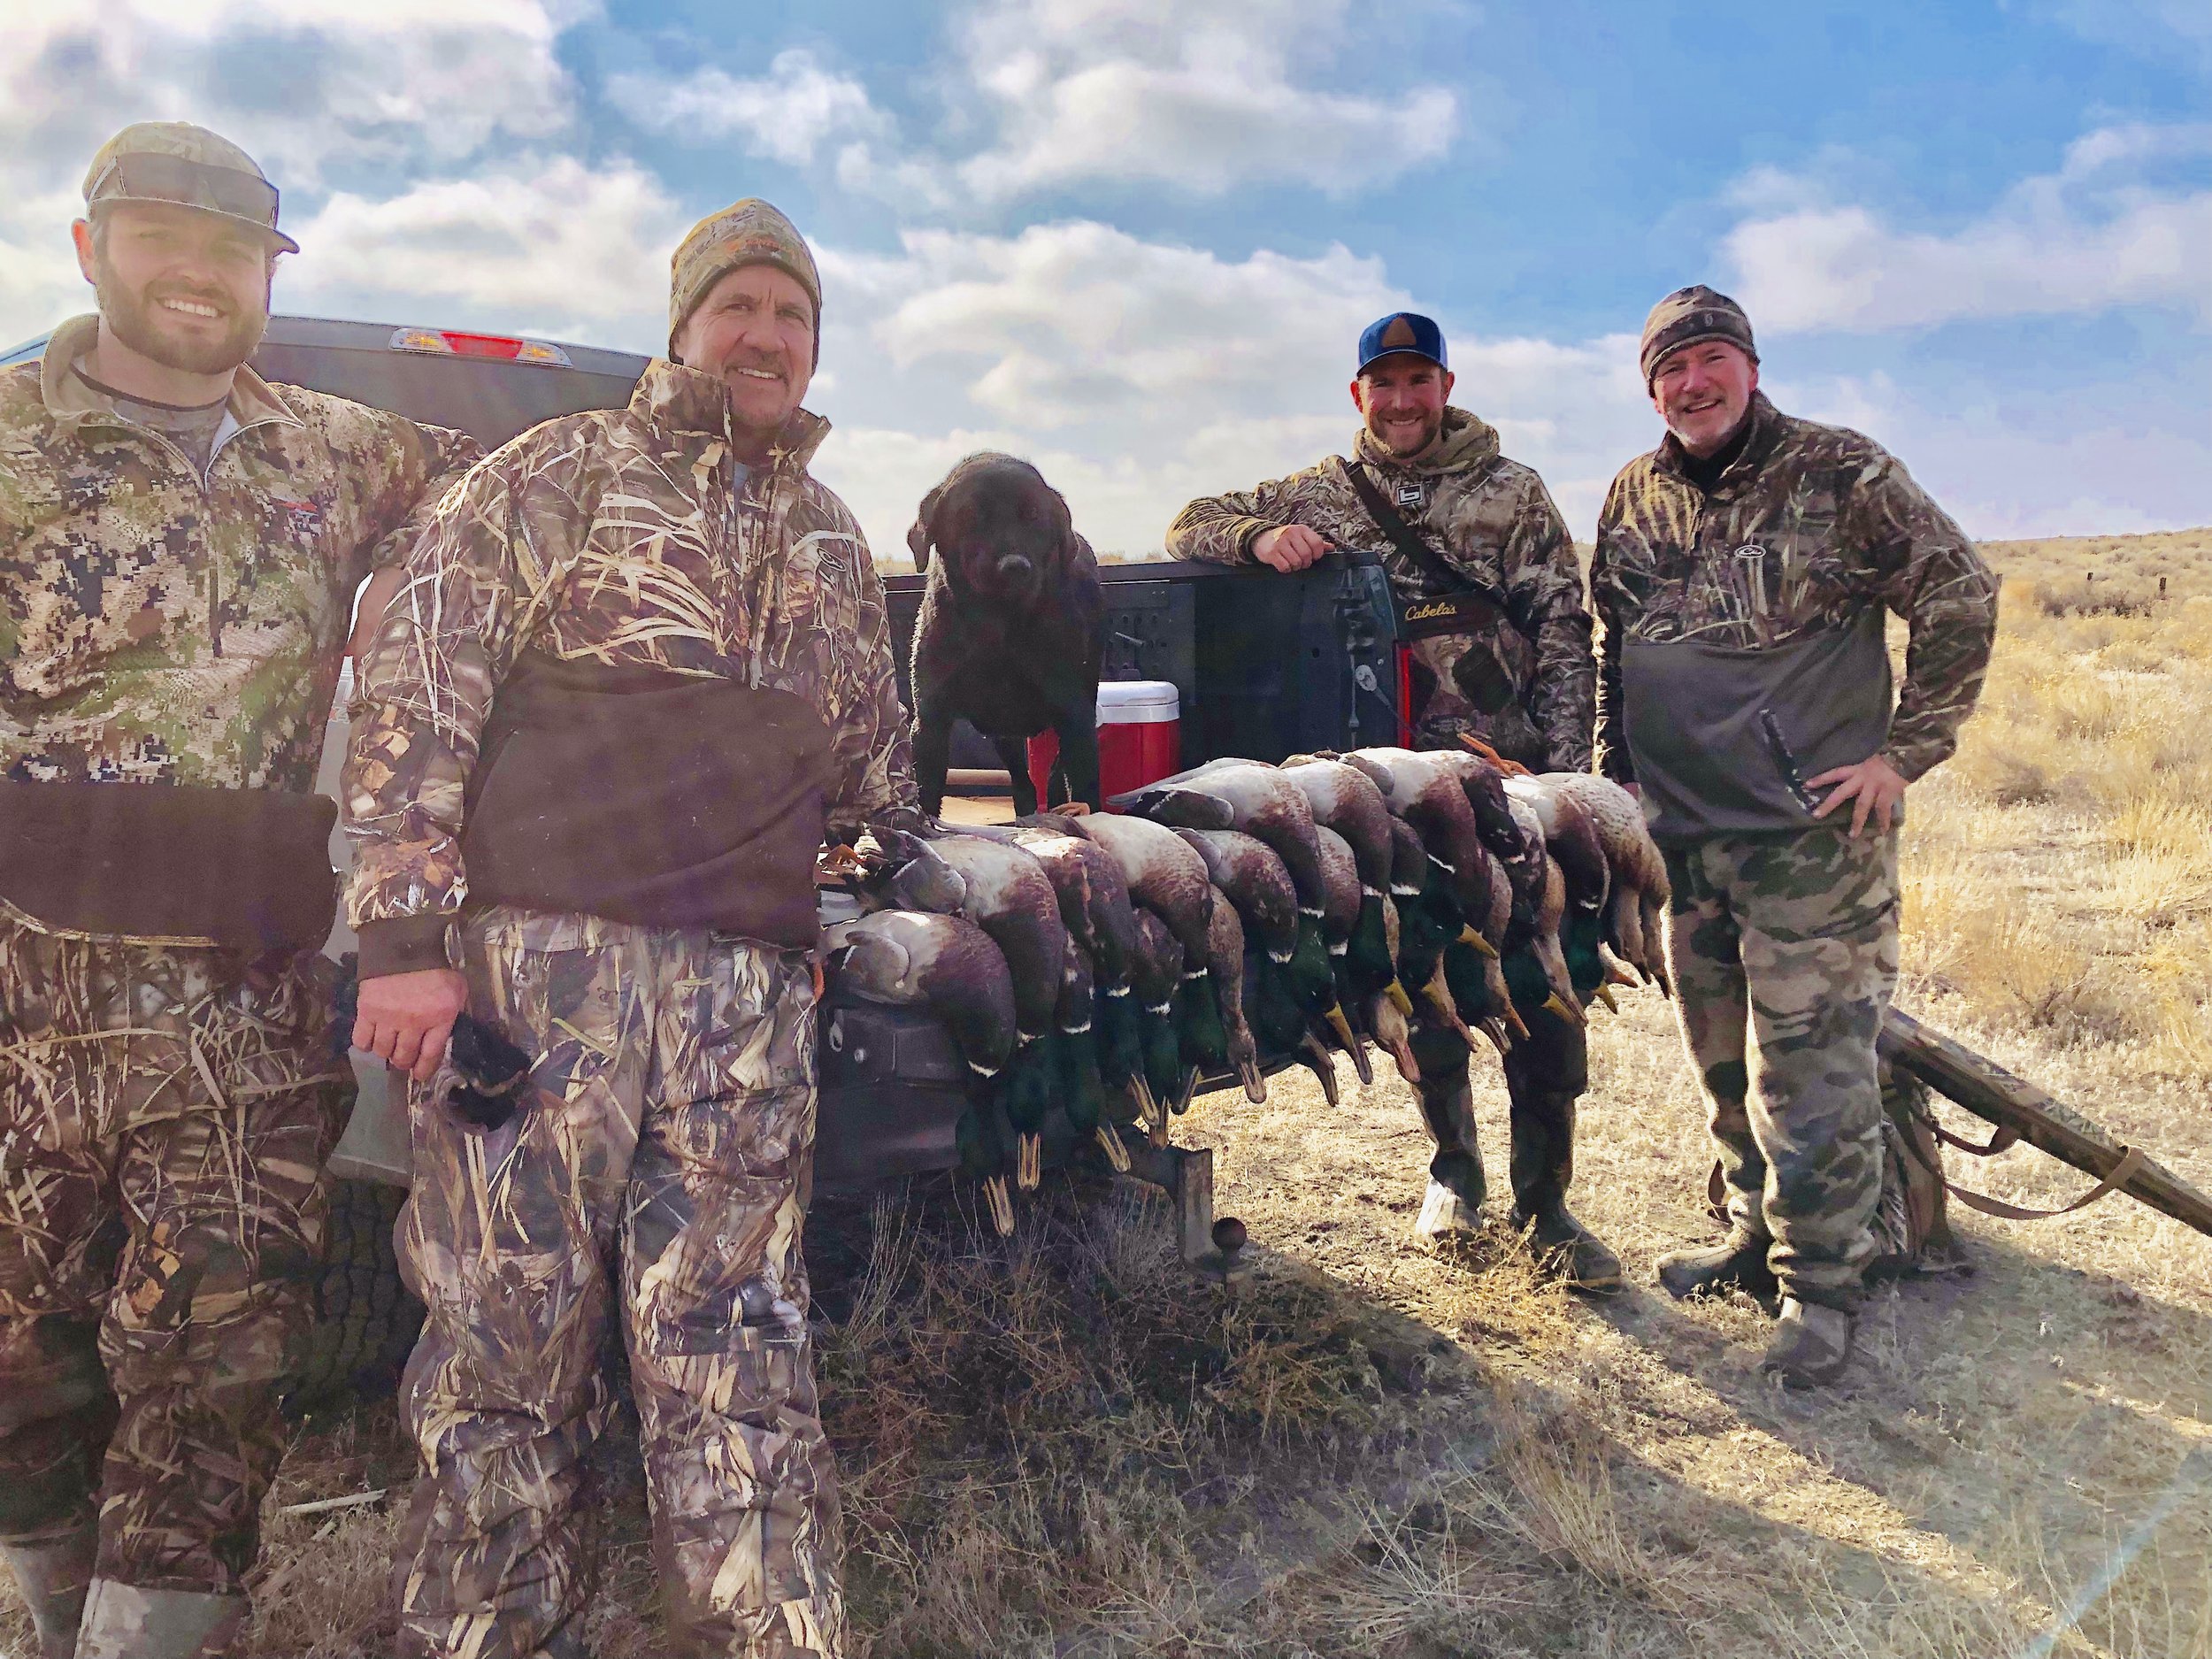 Eastern_Washington_Guides_Duck_Hunting_Limit_Happy_Clients.jpg